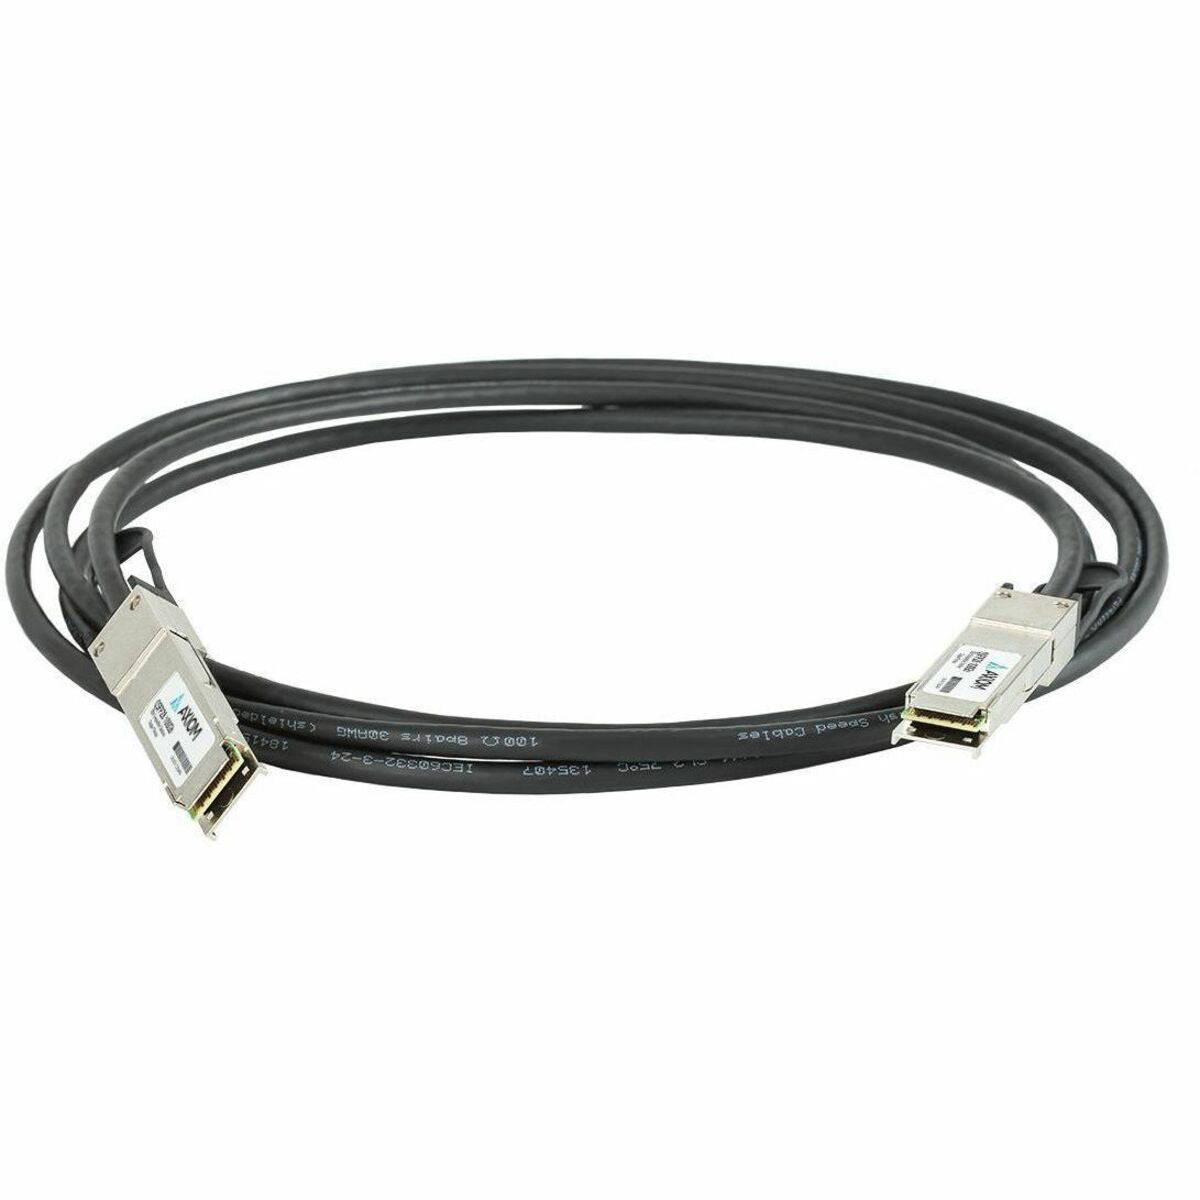 Axiom SF-NDAAFF100G-003M-AX QSFP28 to QSFP28 Passive Twinax Cable 3m, High-Speed Network Cable for Fast Data Transfer